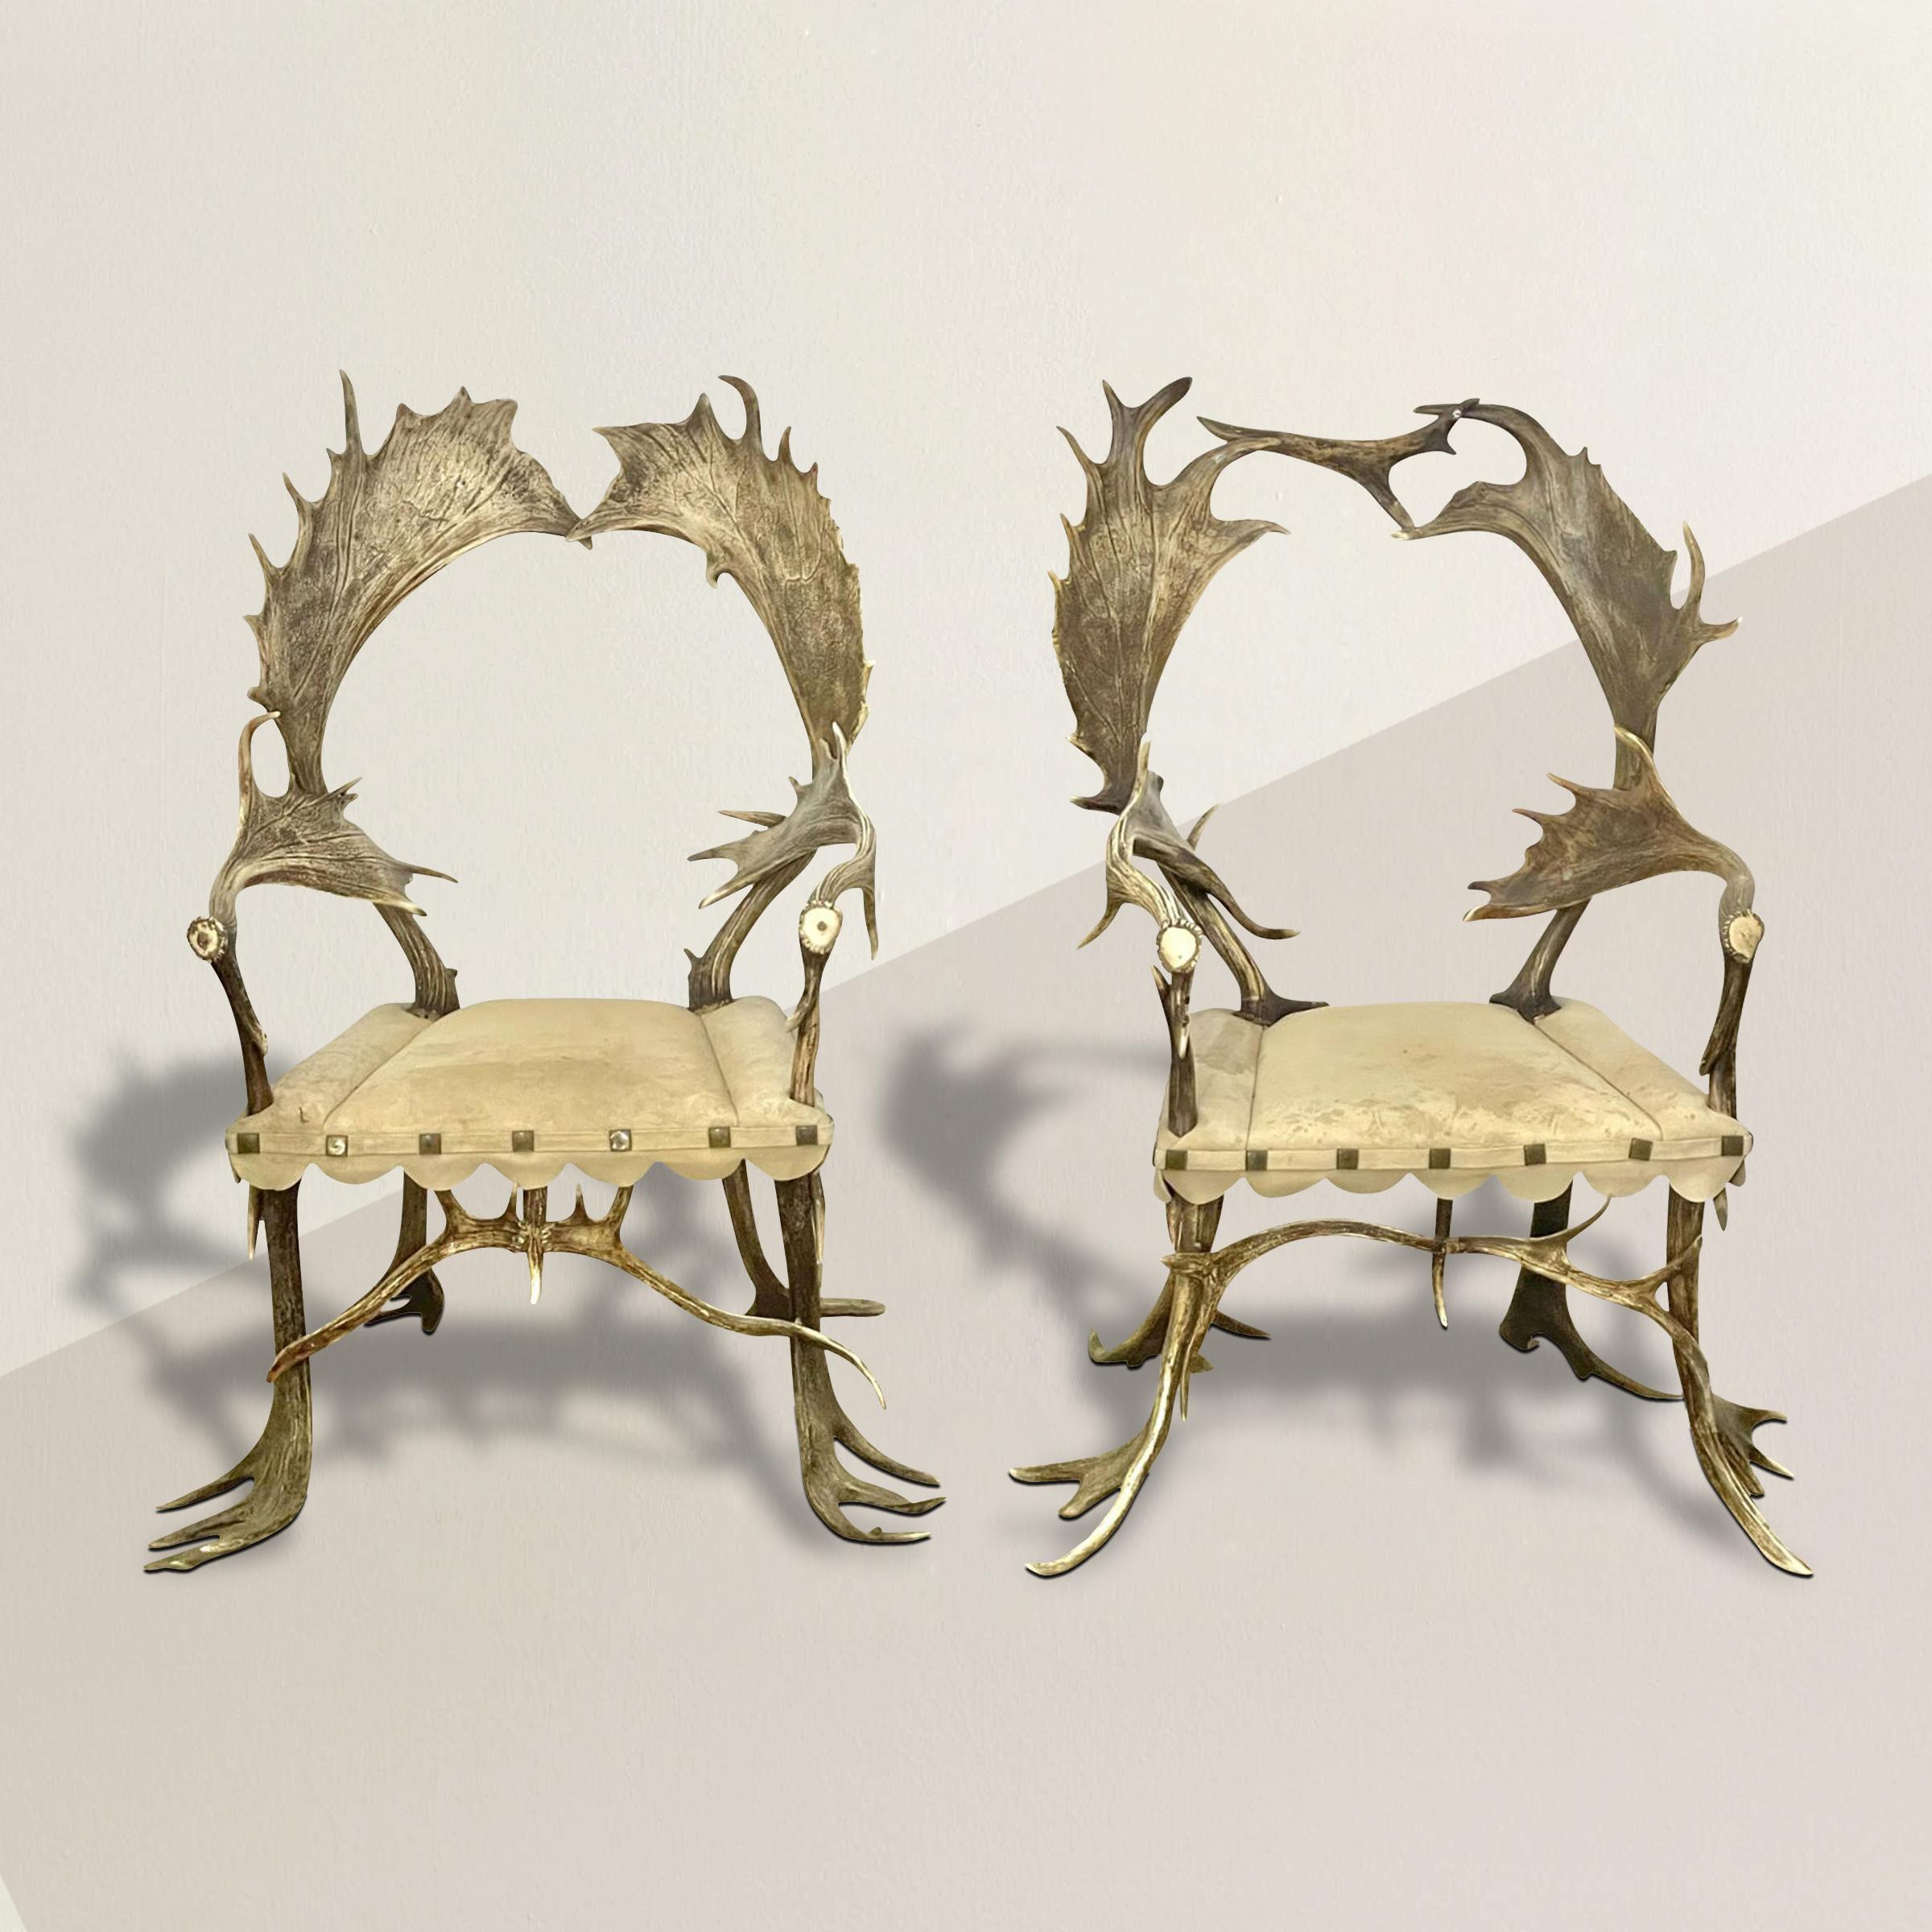 An incredible pair of 19th century Bavarian hunting lodge armchairs with backs, arms, and legs constructed from Fallow Deer antlers, and upholstered in cream colored suede with square nailhead trim. Perfect for your mountain home, hunting lodge, or